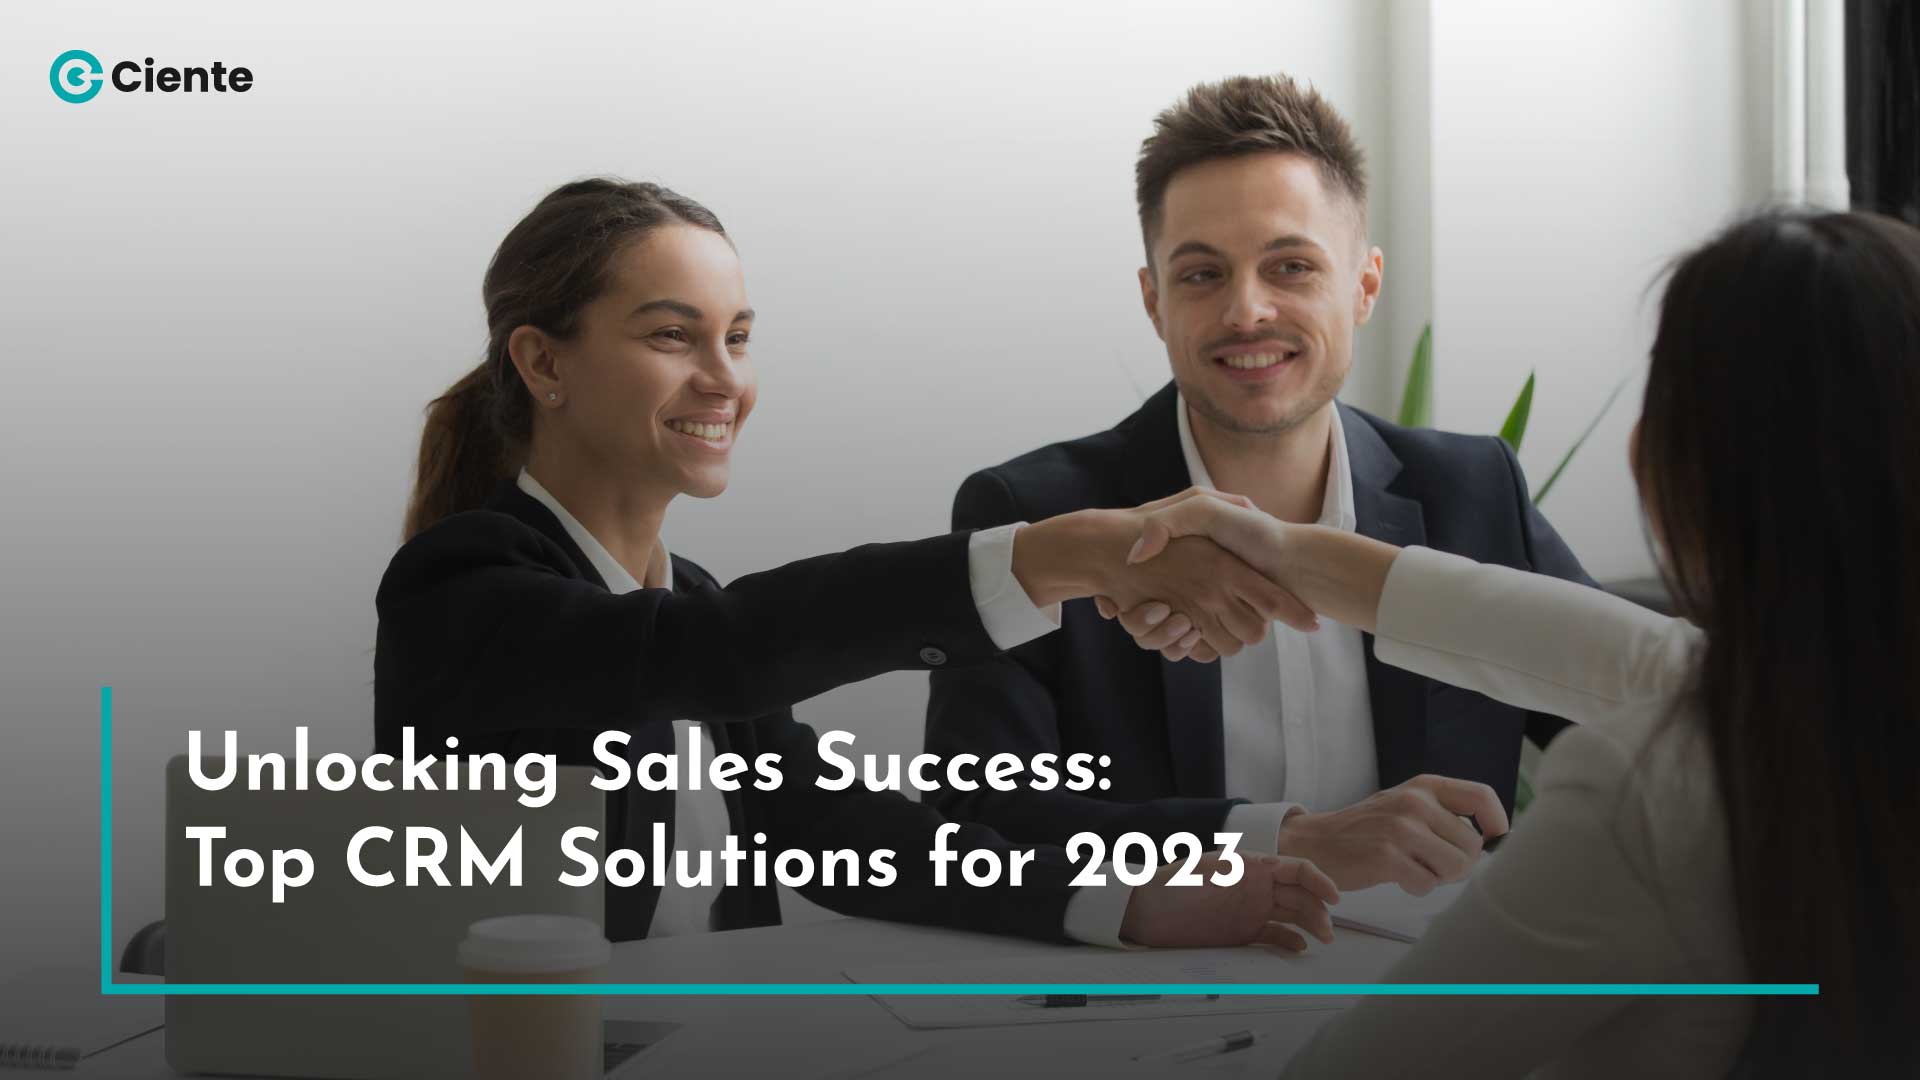 Unlocking-Sales-Success-Top-CRM-Solutions-for-2023-new